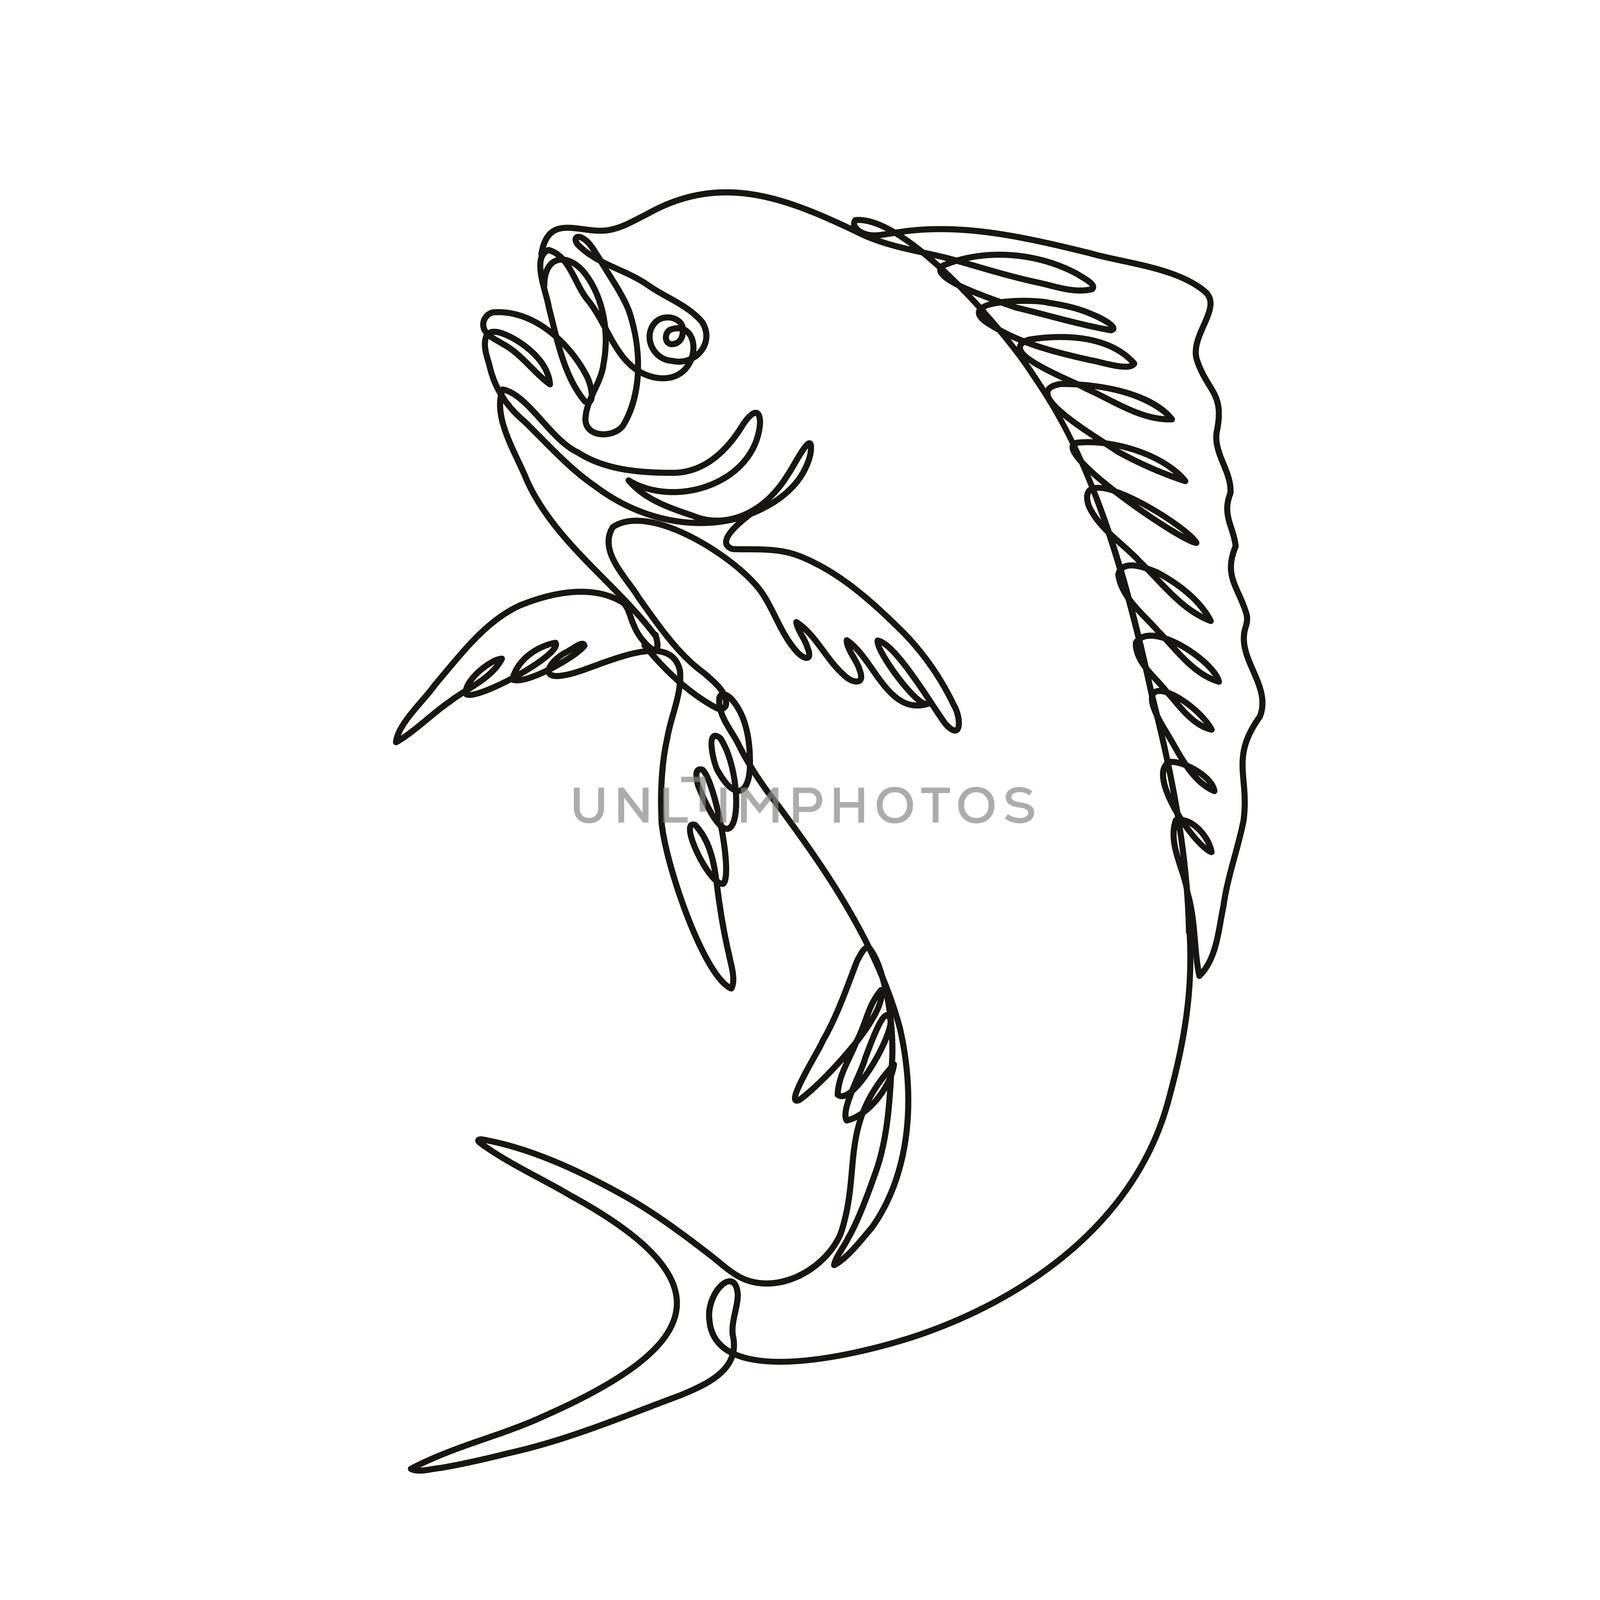 Continuous line drawing illustration of a dorado dolphin fish or mahi mahi Jumping Up done in mono line or doodle style in black and white on isolated background. 